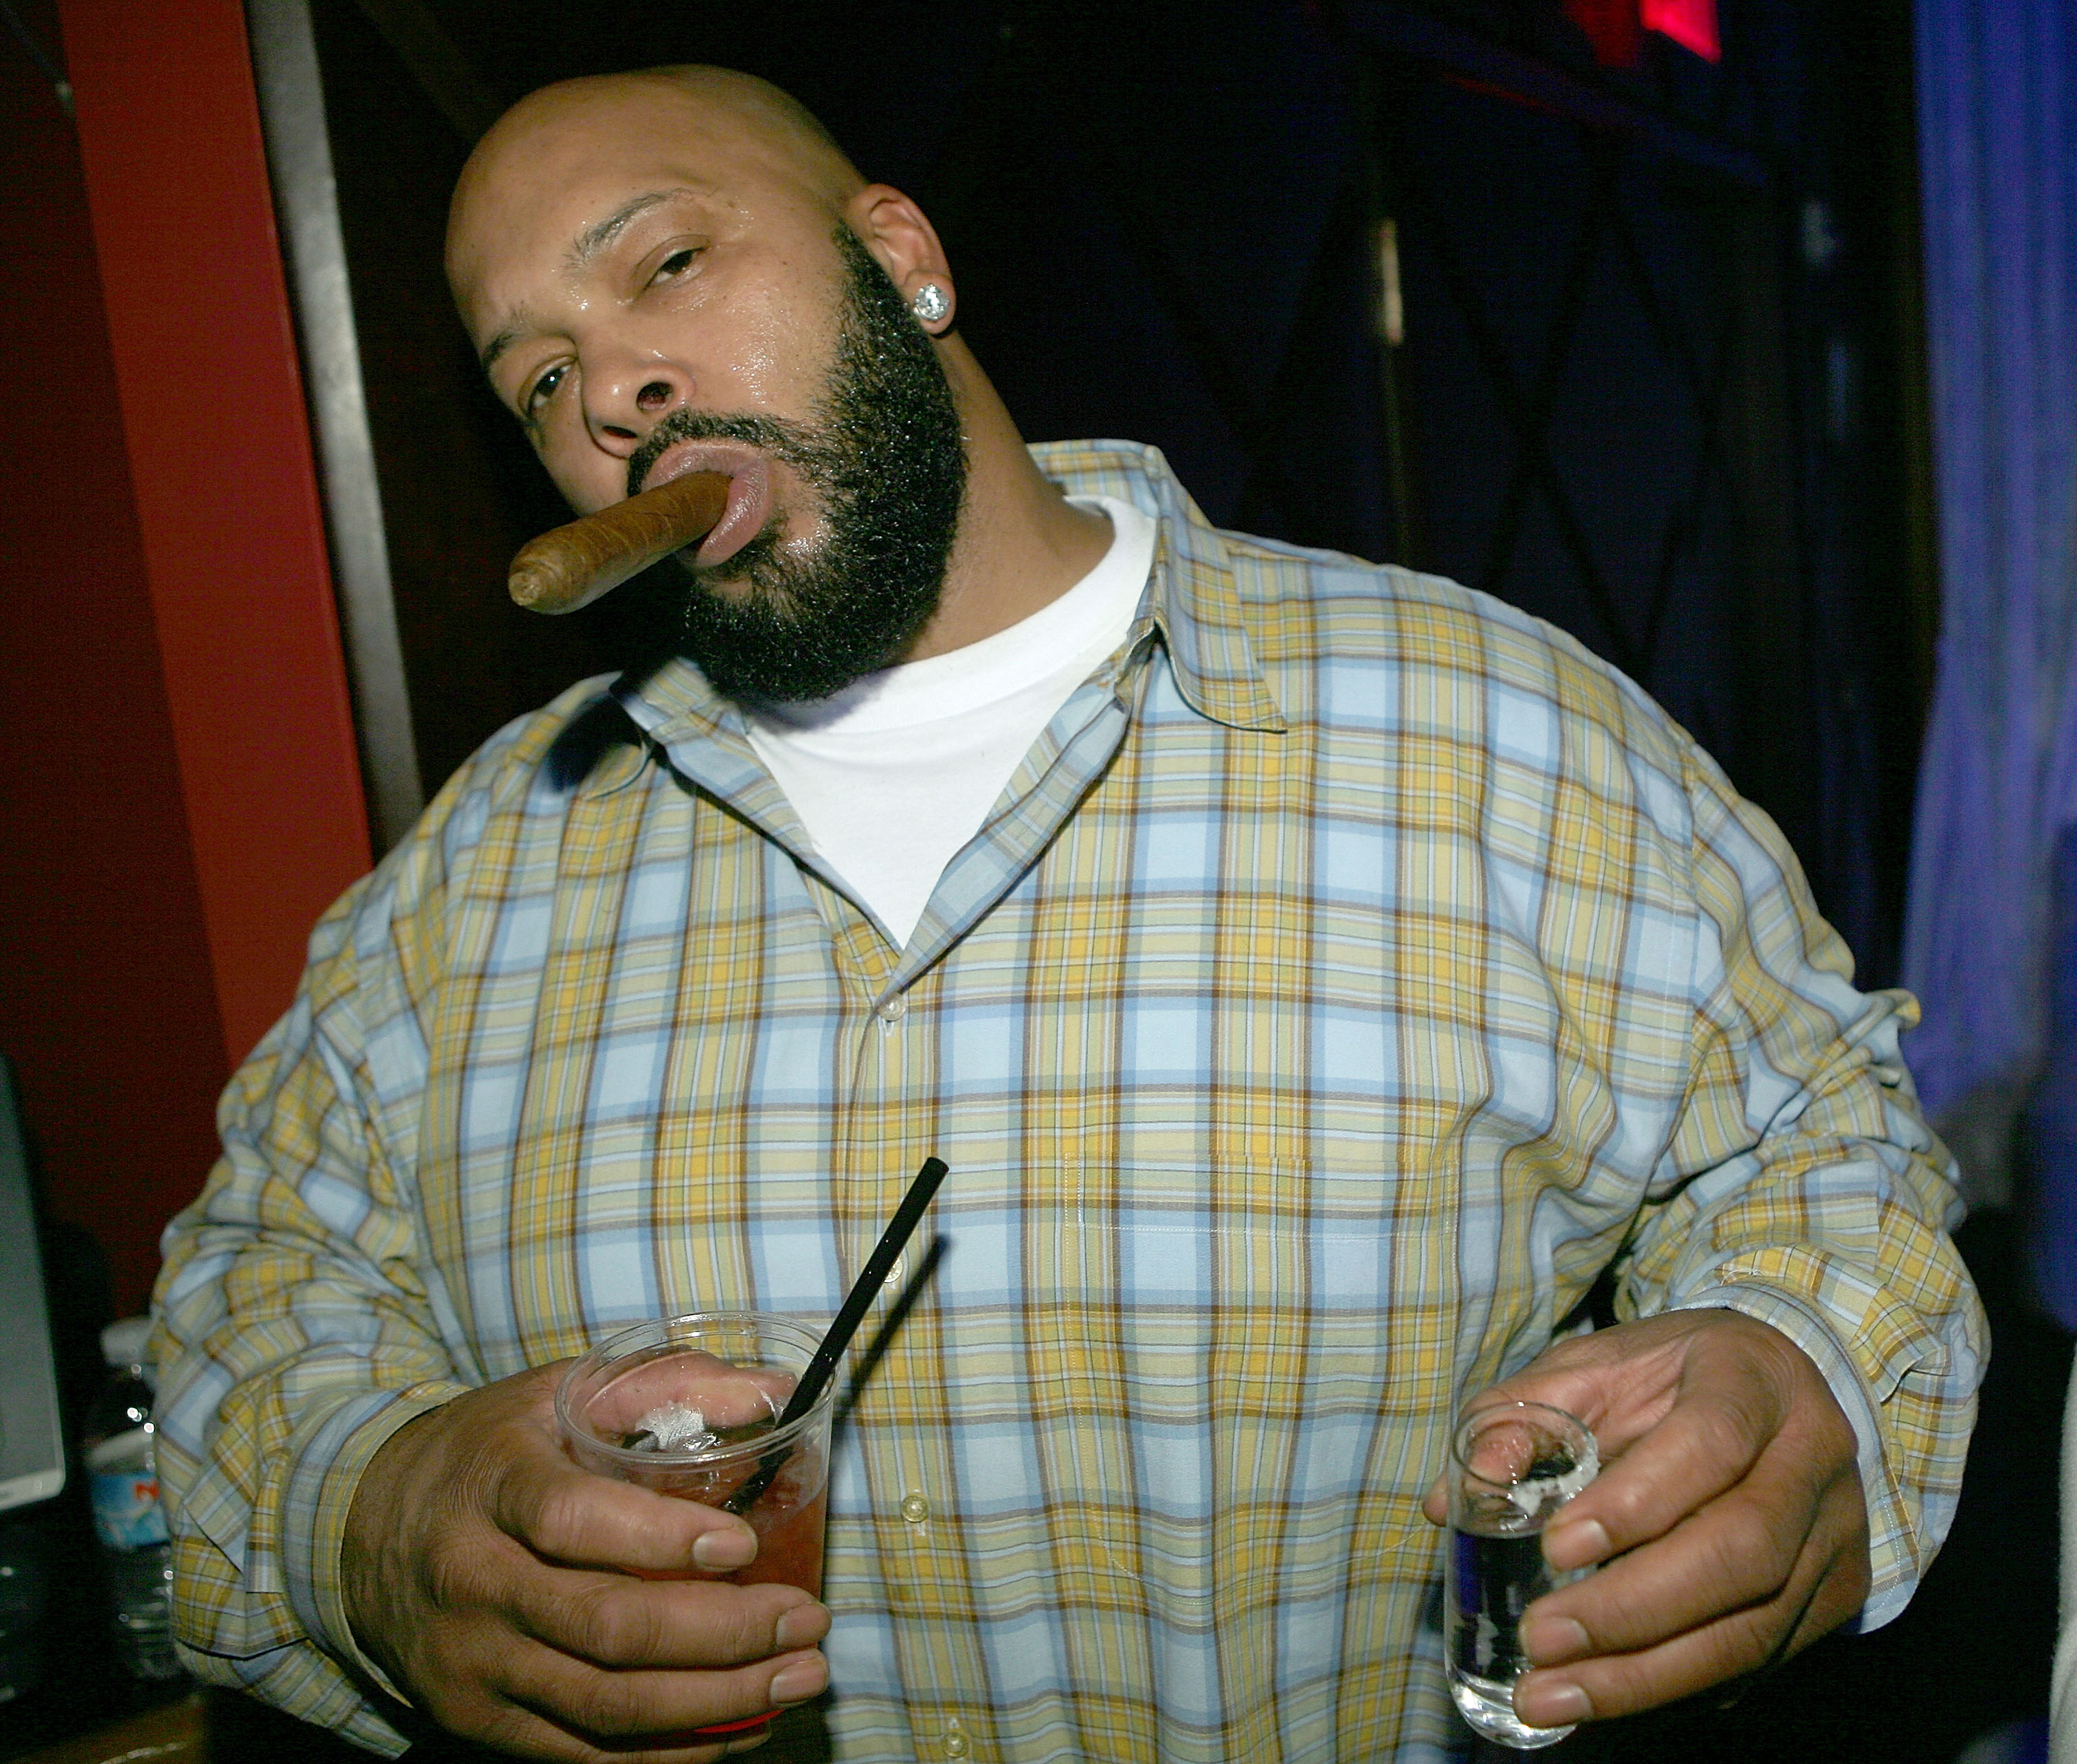 Suge Knight Did Not Want Smoke With Charles Oakley, Scottie Pippen Claims